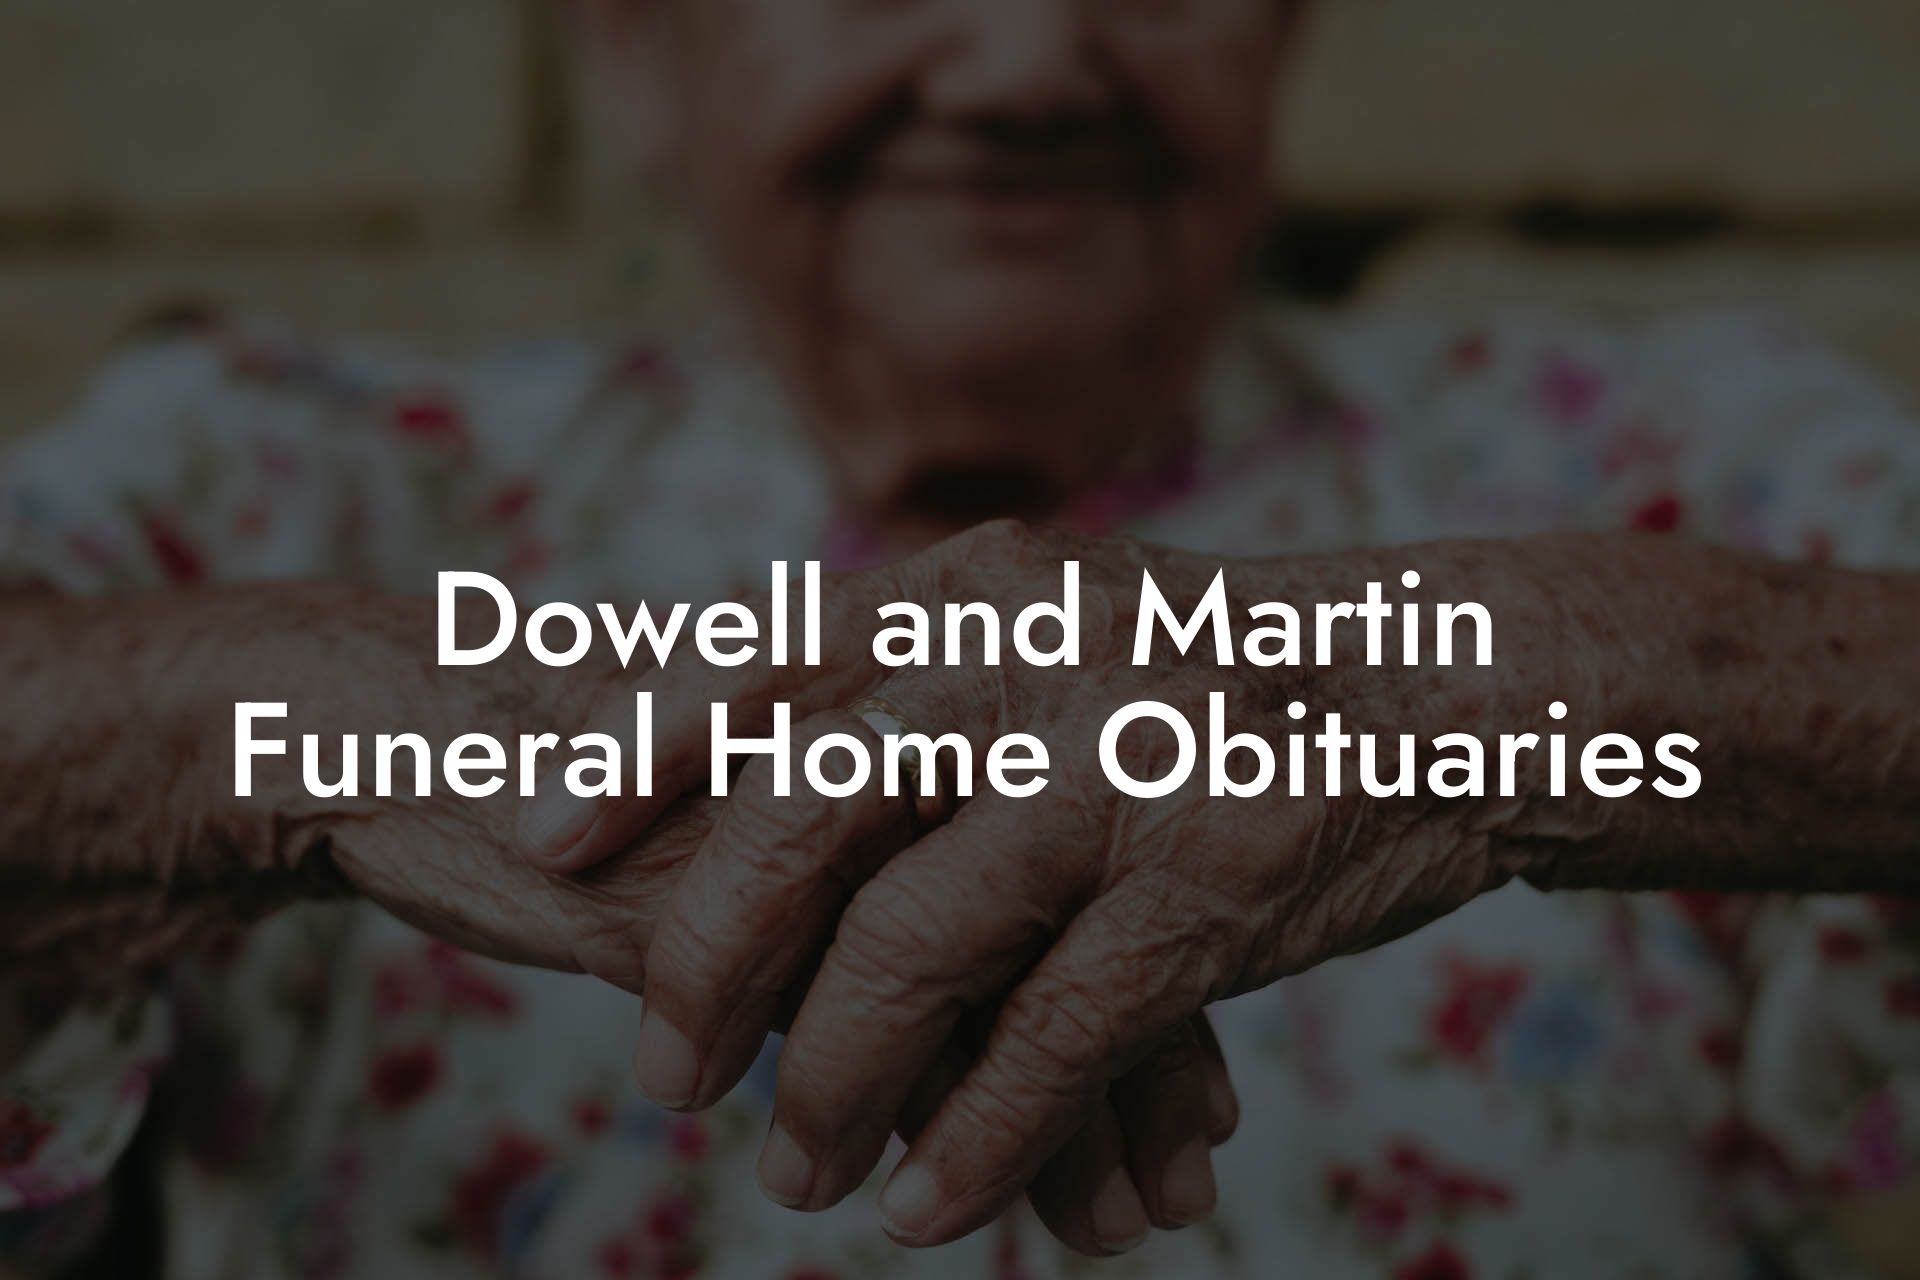 Dowell and Martin Funeral Home Obituaries